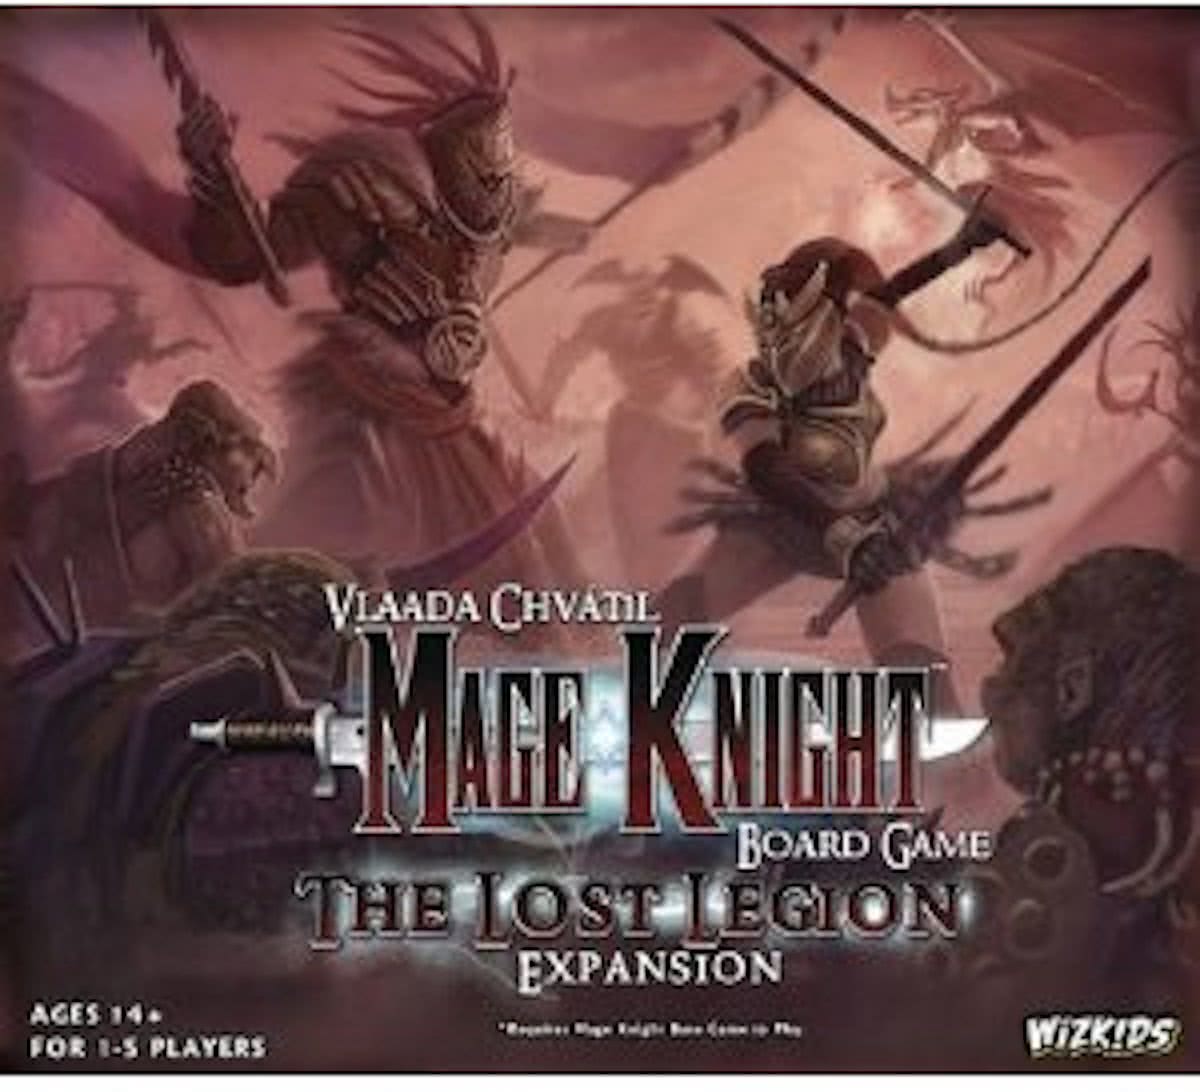 Mage Knight - Lost Legion Expansion